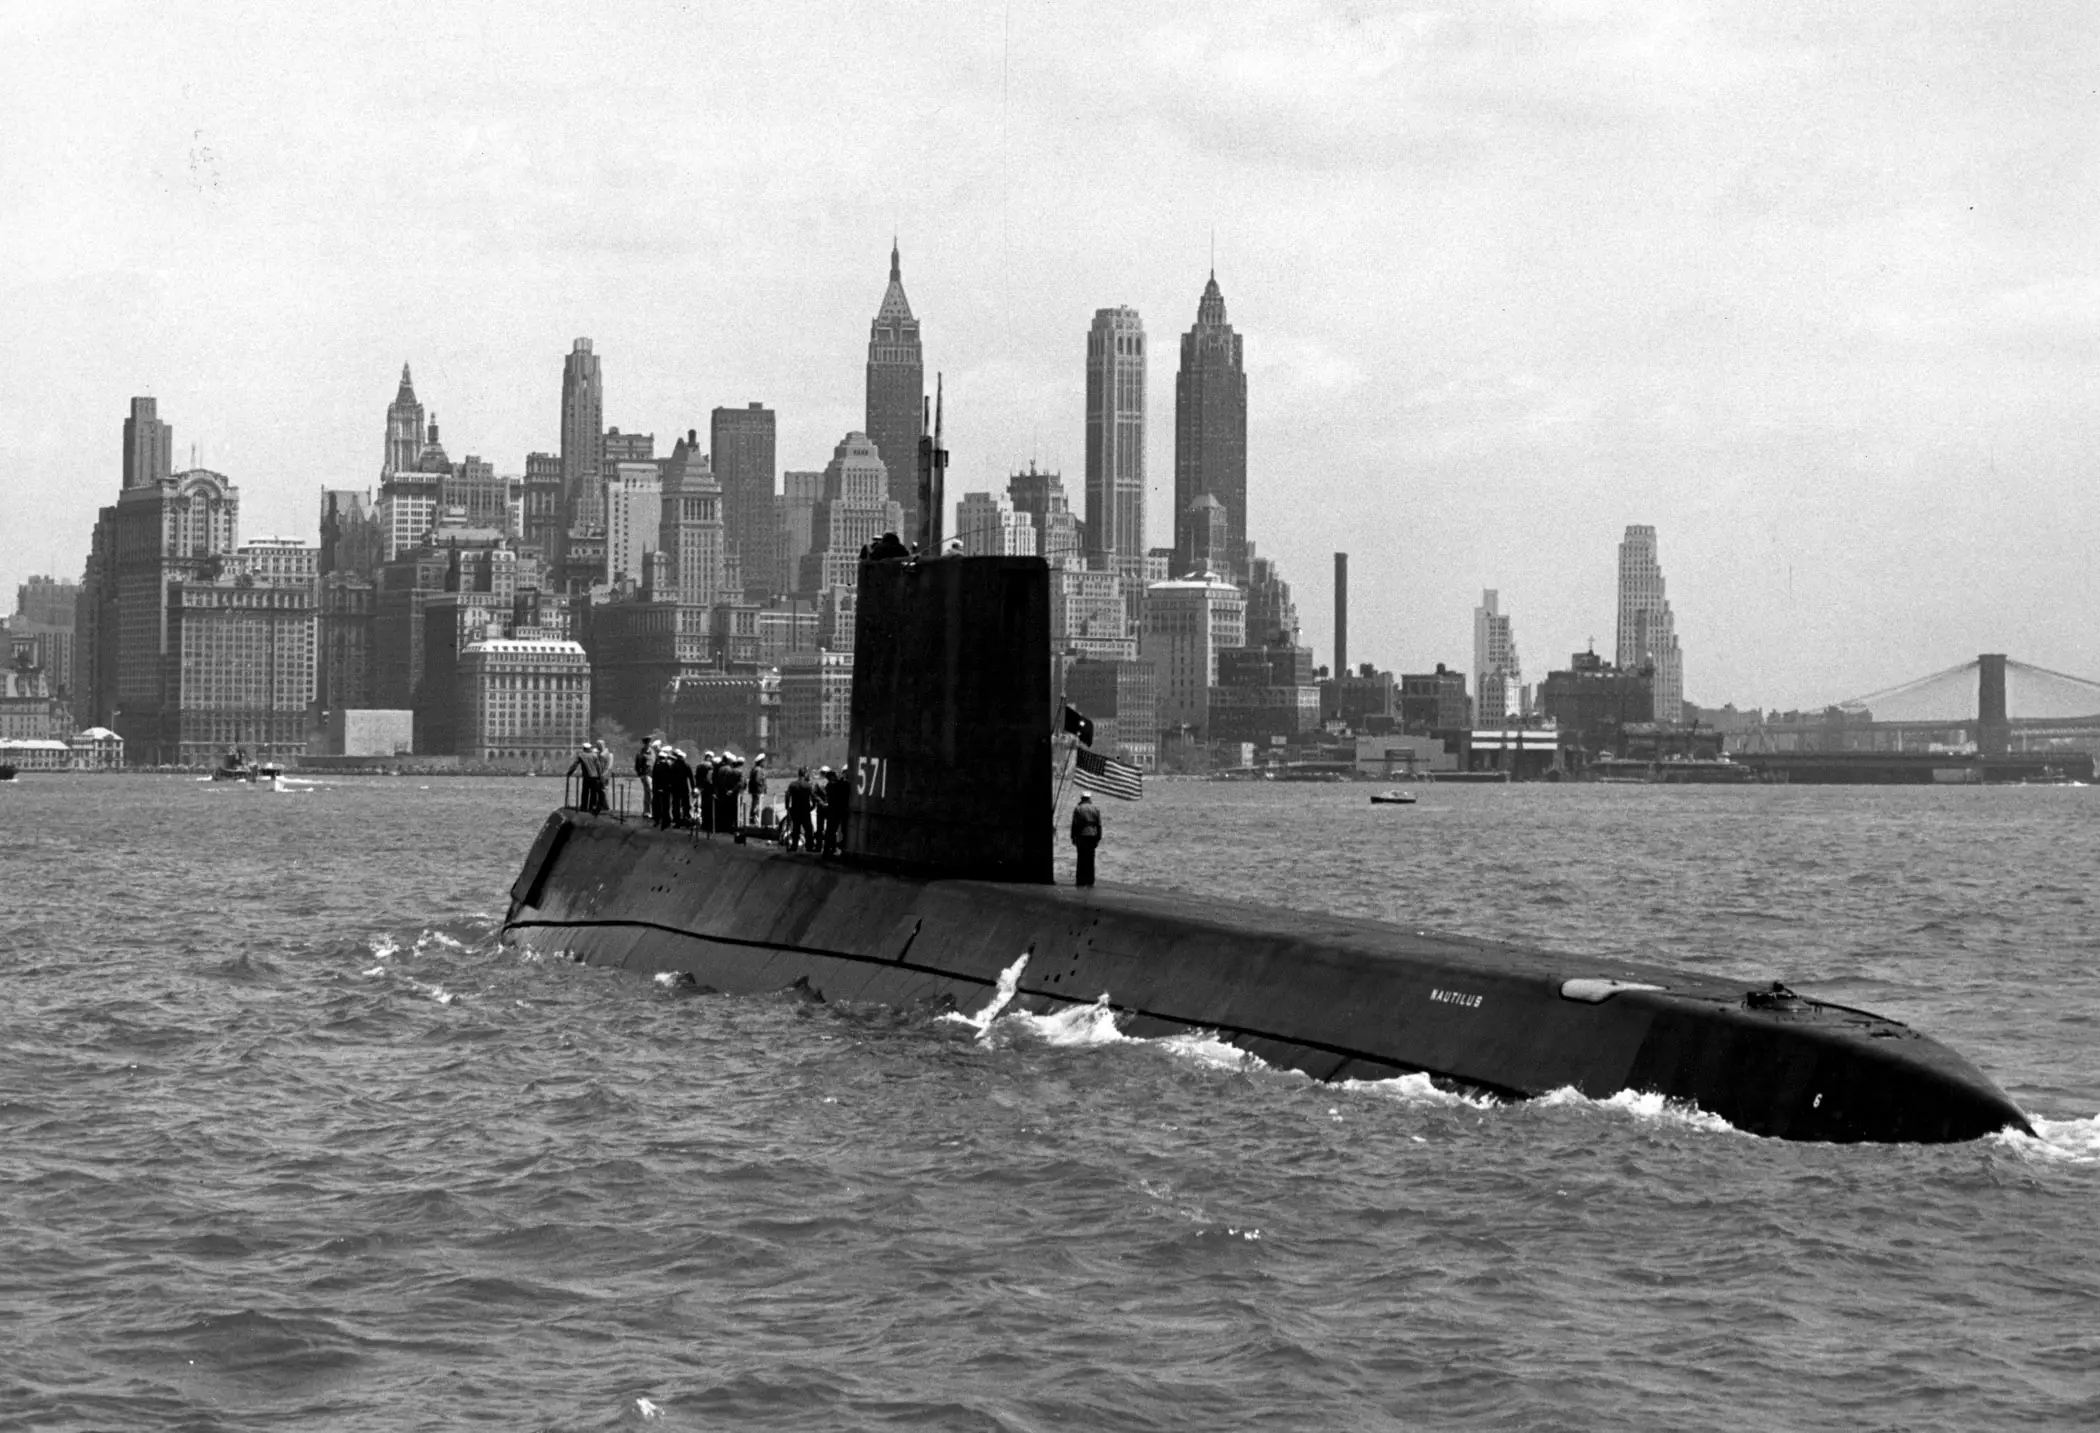 Nautilus is the first nuclear-powered submarine